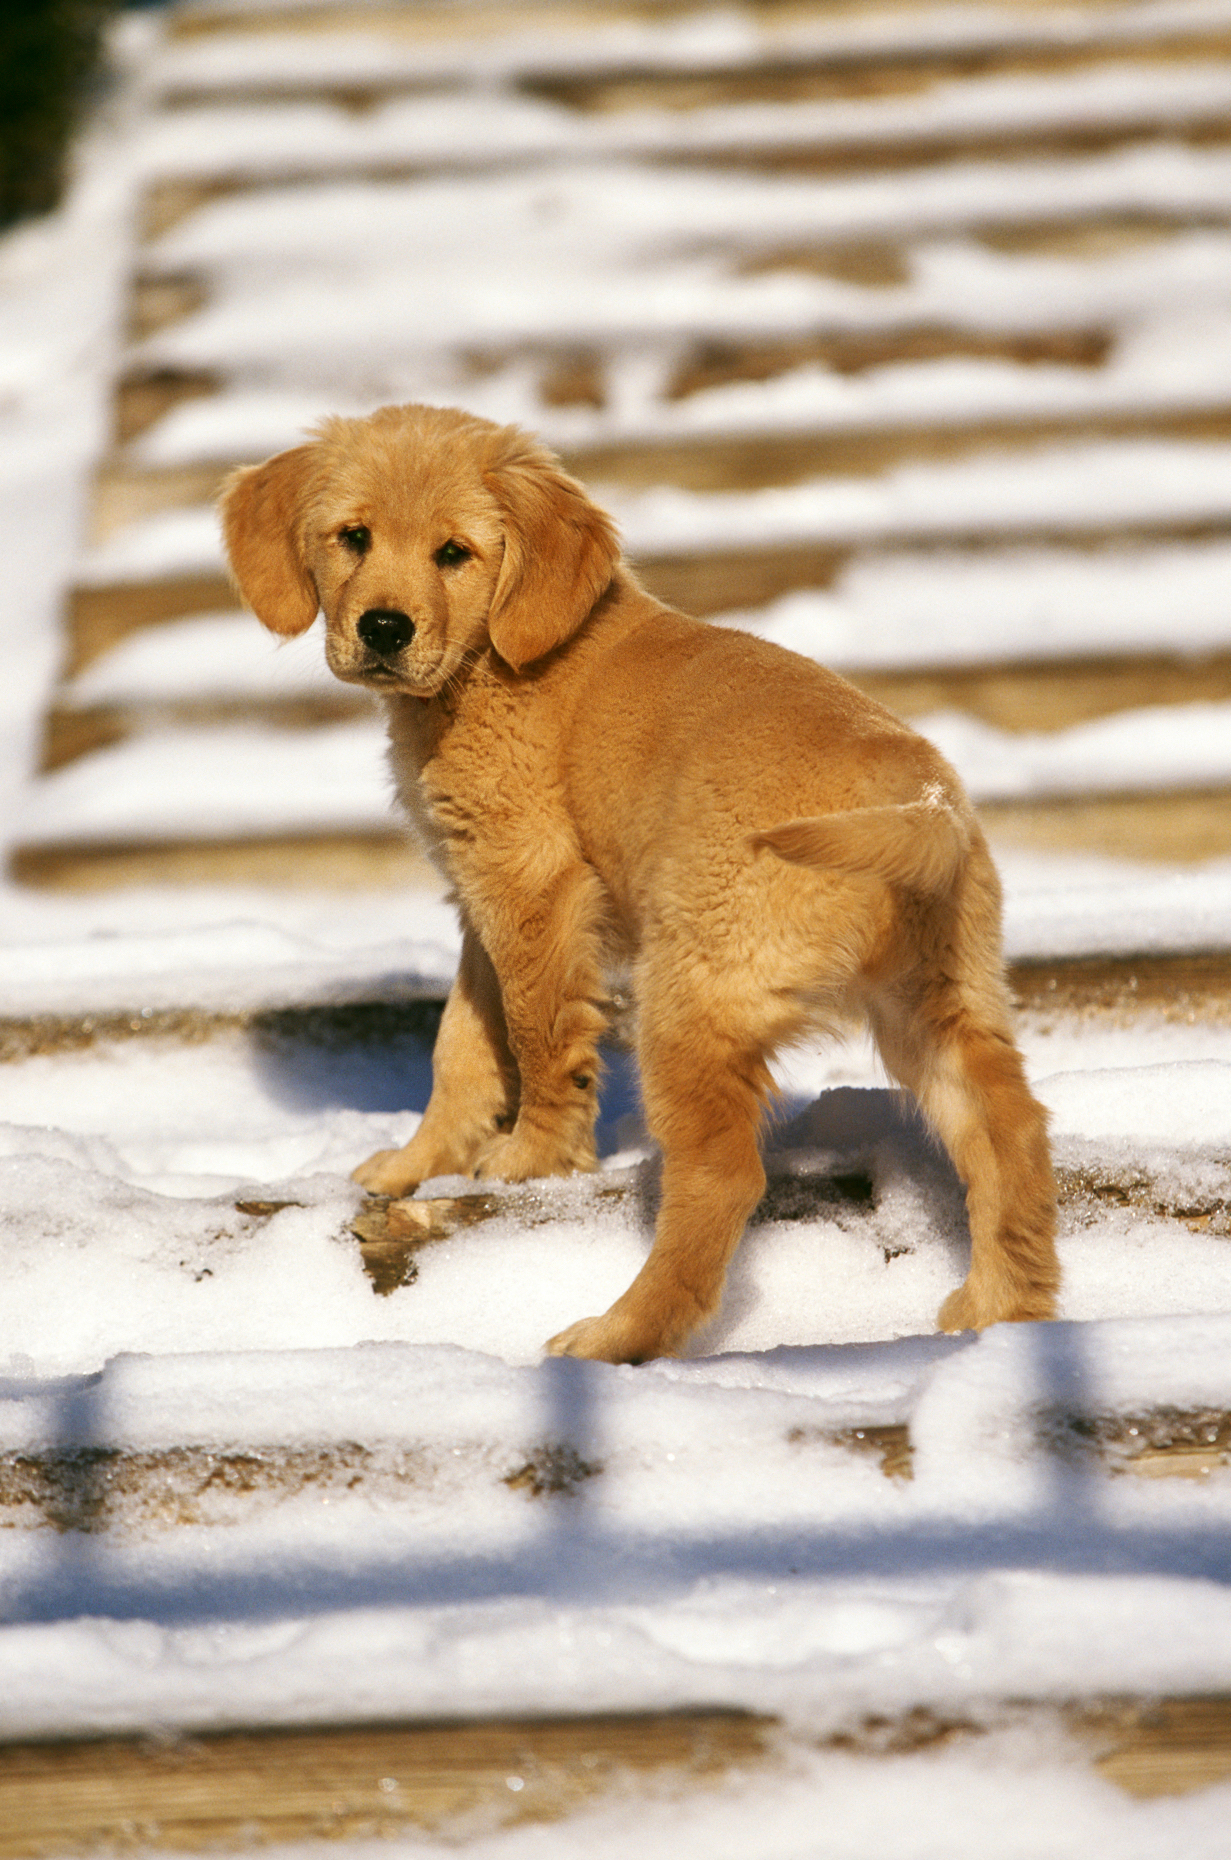 Golden Retriever puppy climbing steps outside in the snow.